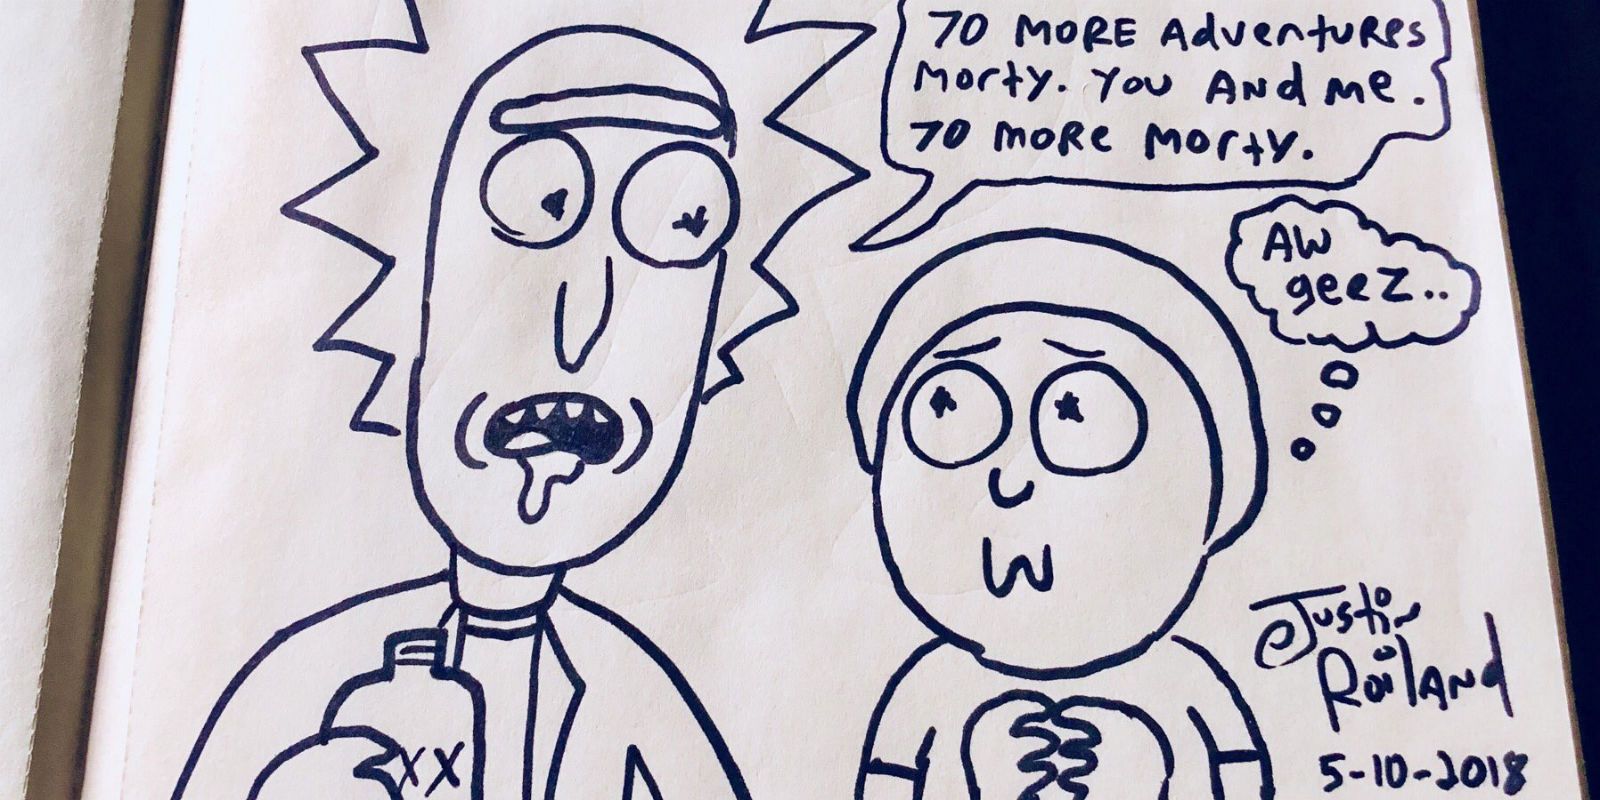 Rick and Morty - 70 more episodes